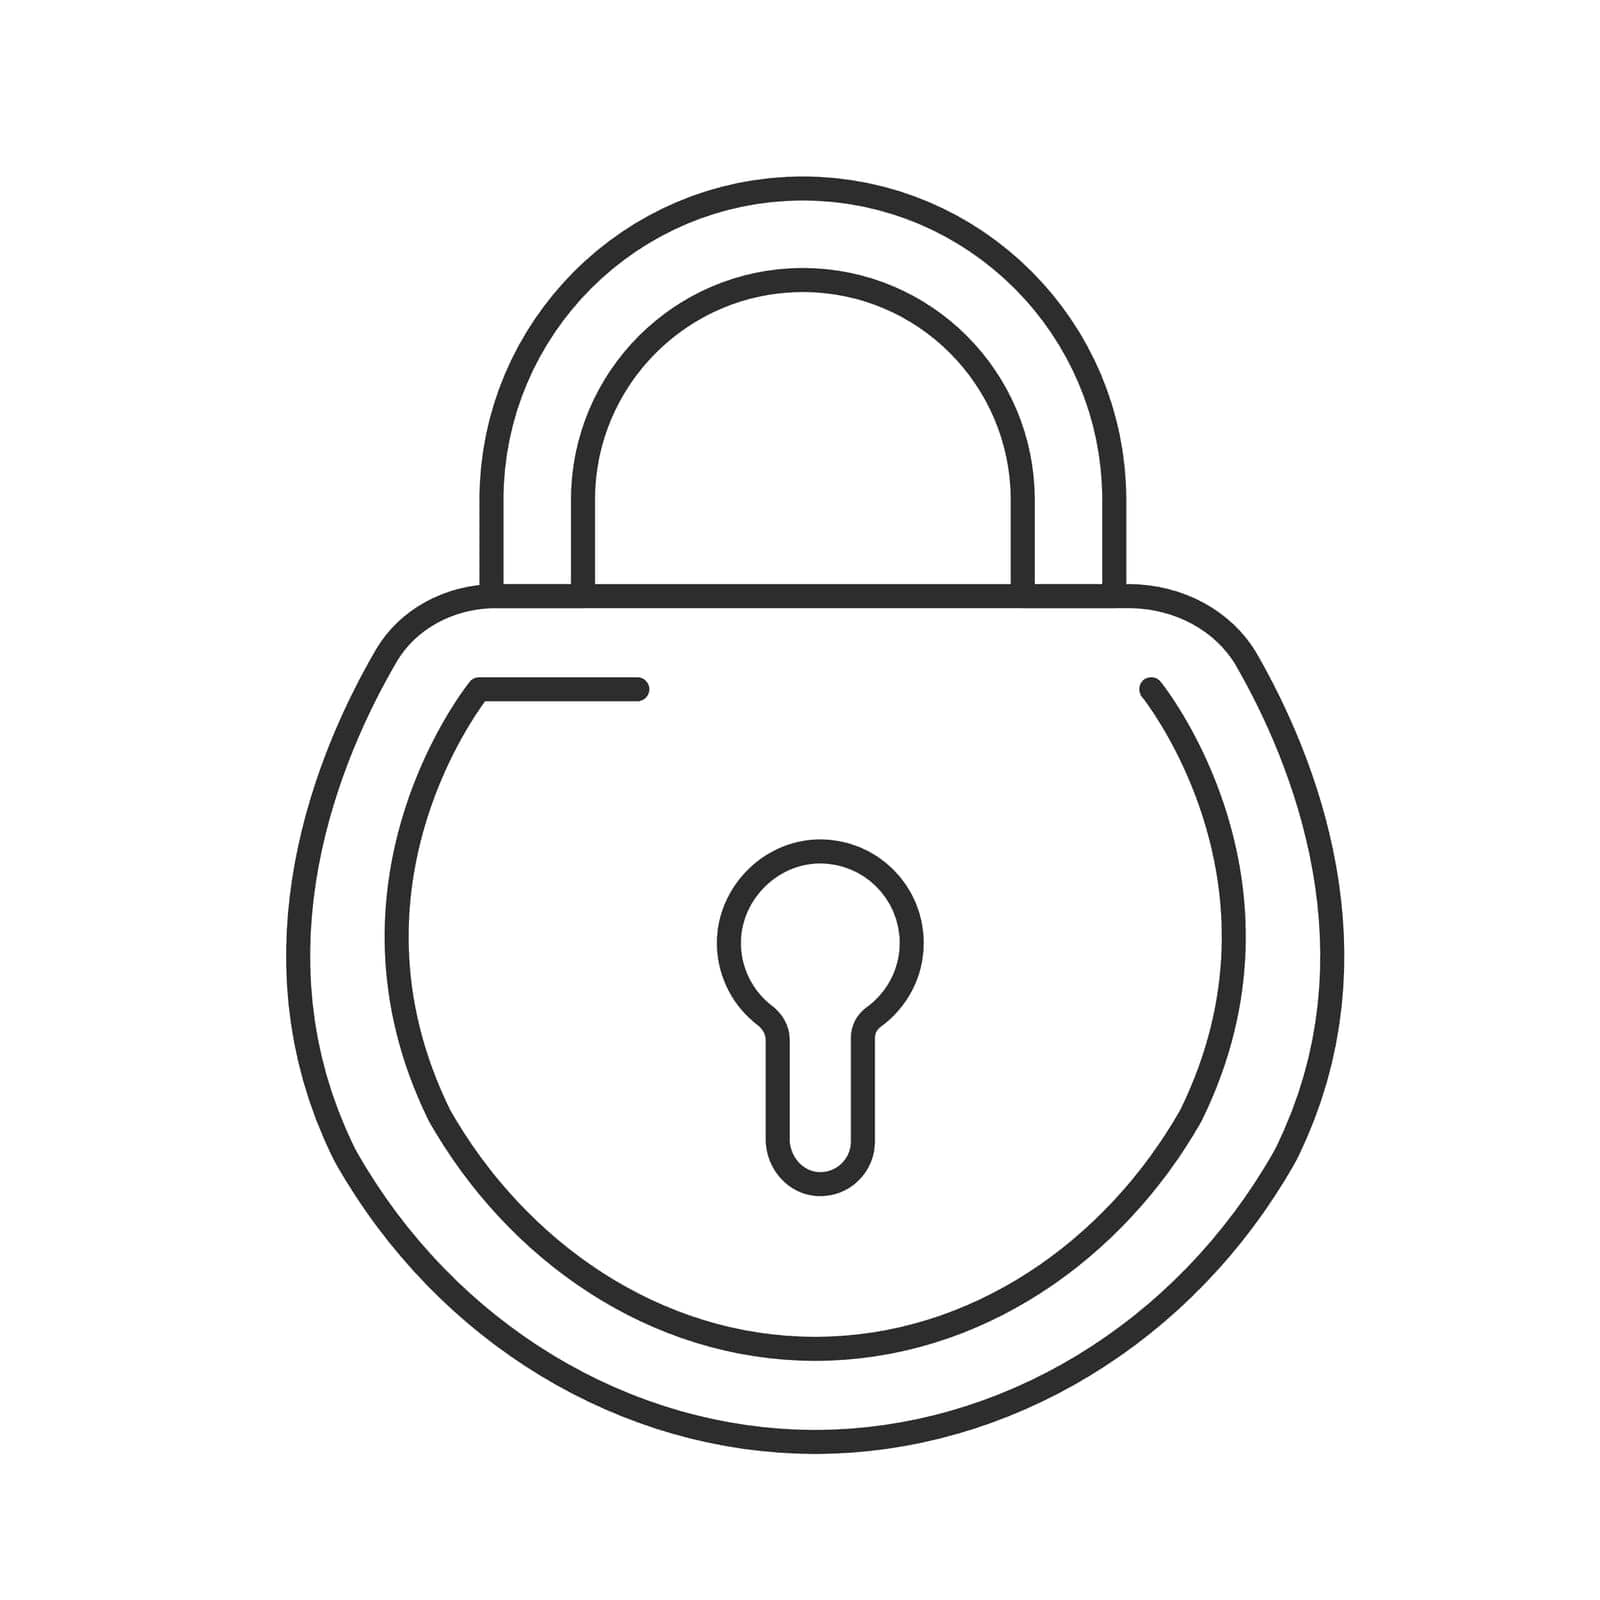 Lock icon with editable stroke. Cyber security